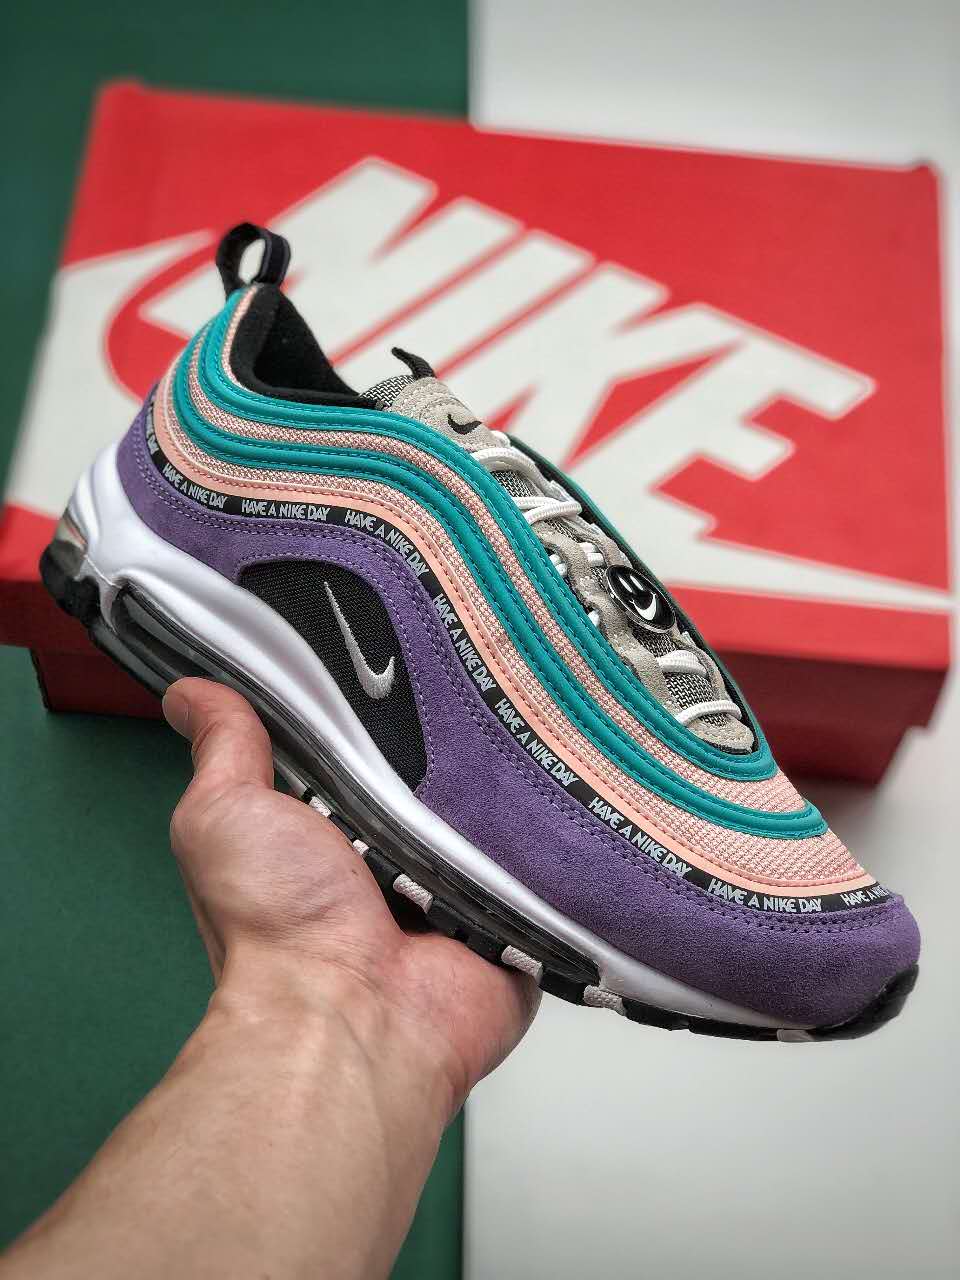 Air Max 97 'Have A Nike Day' 923288-500 - Exclusive Nike Sneakers